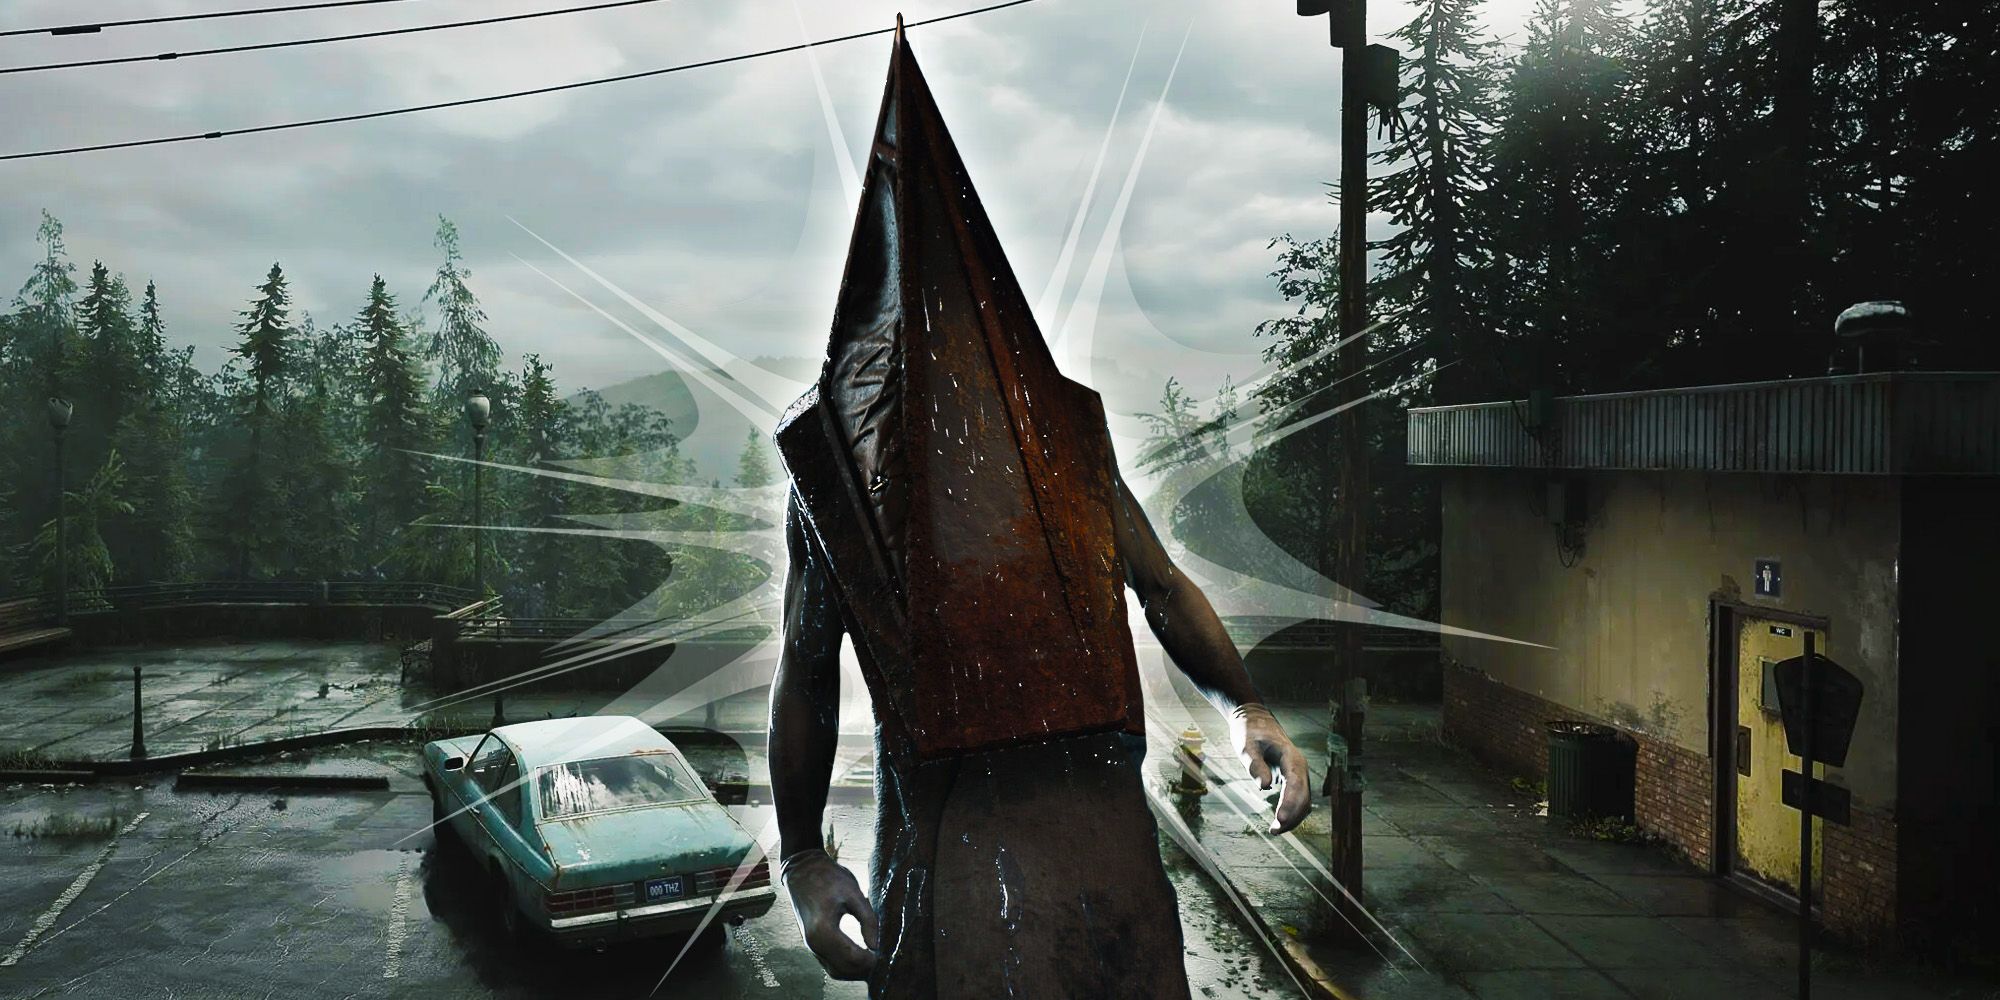 Silent Hill 2 remake might feature a separate Pyramid Head campaign